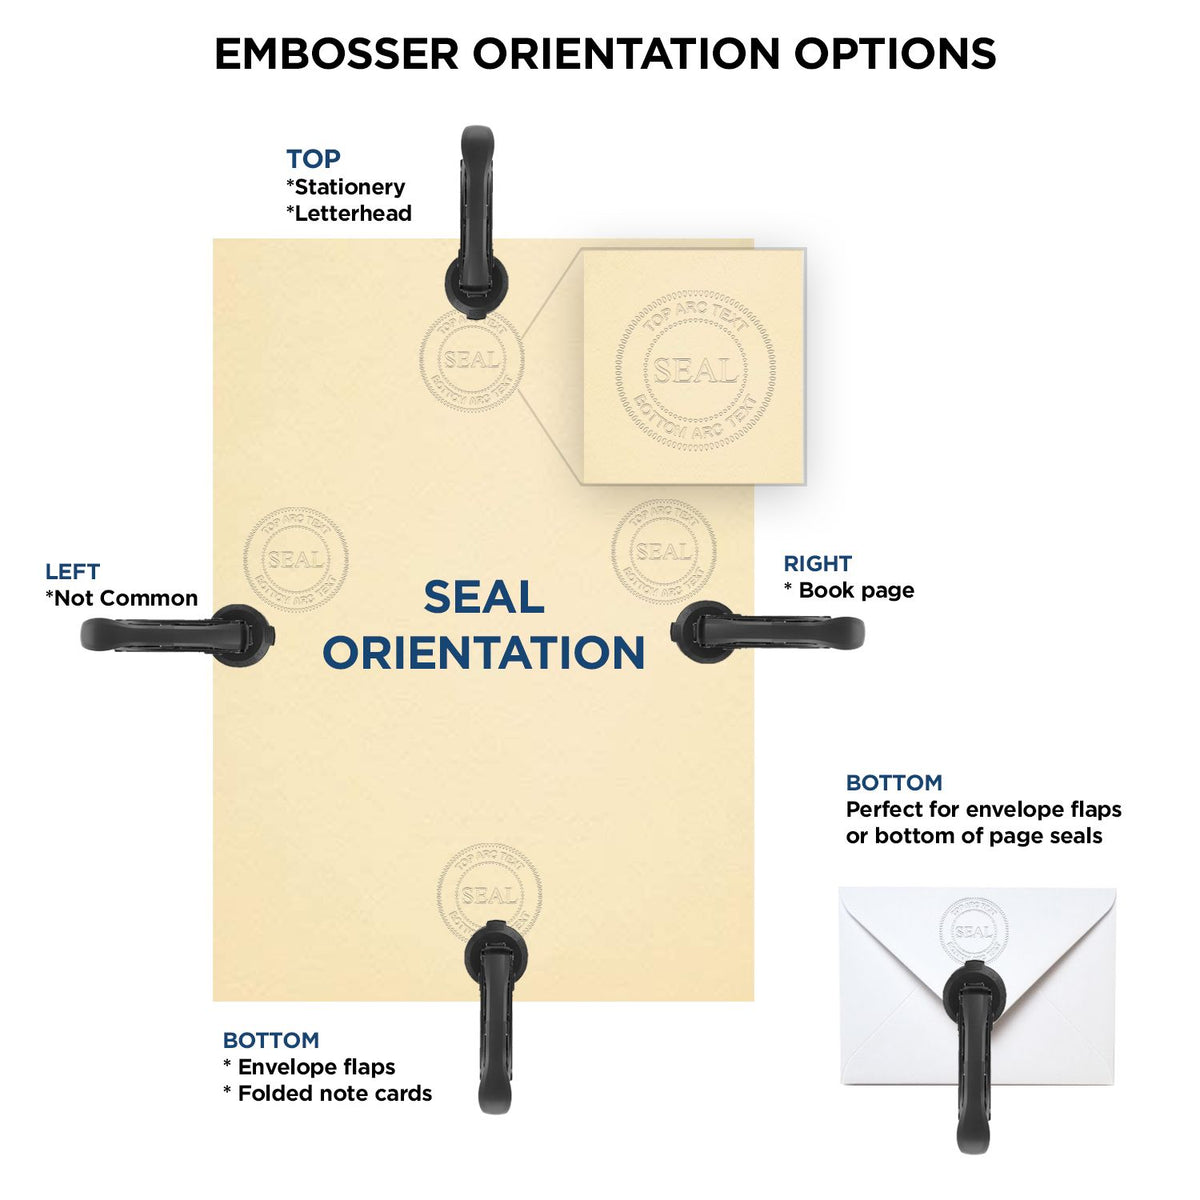 An infographic for the Alabama Engineer Desk Seal showing embosser orientation, this is showing examples of a top, bottom, right and left insert.